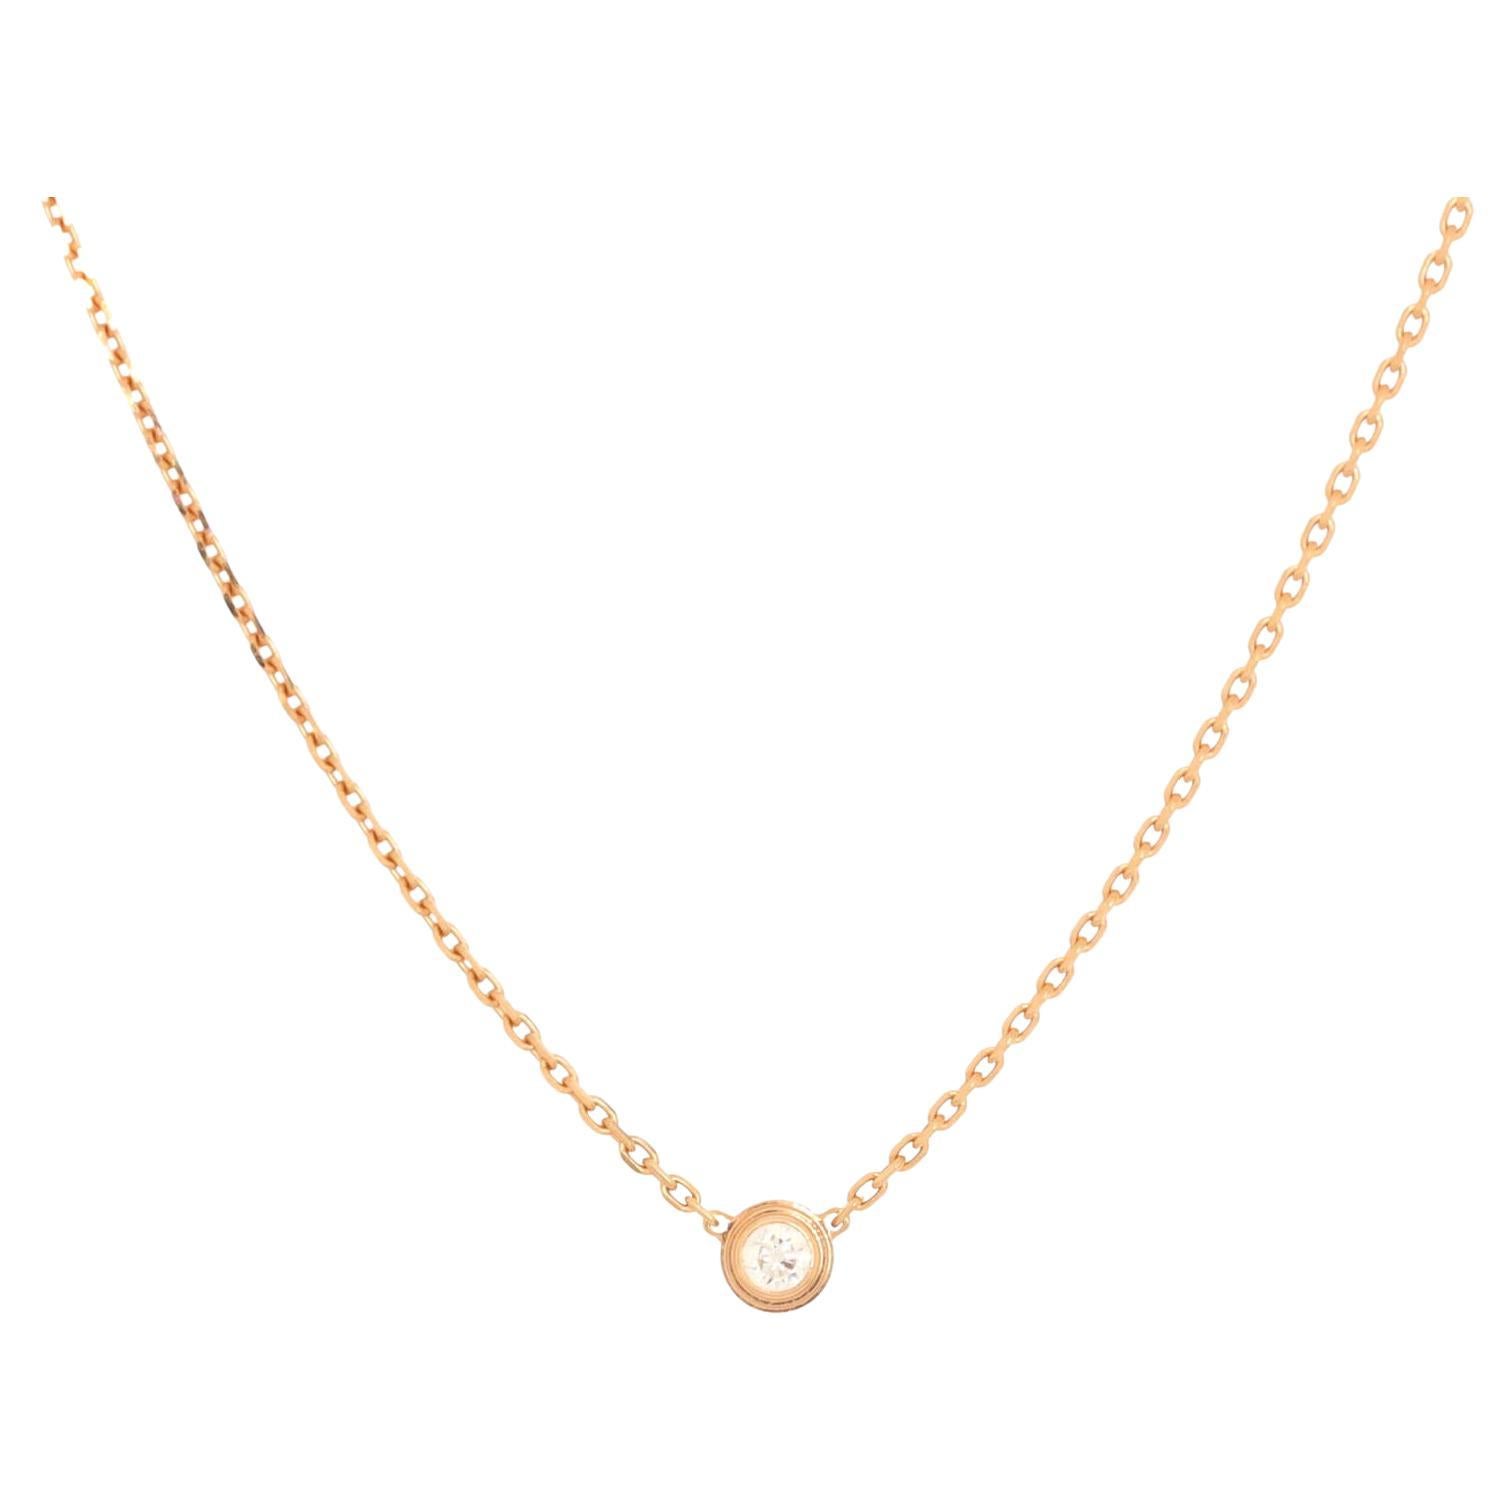 Cartier d'Amour Necklace, XS - 19K Rose Gold Chain, Necklaces - CRT96338 |  The RealReal